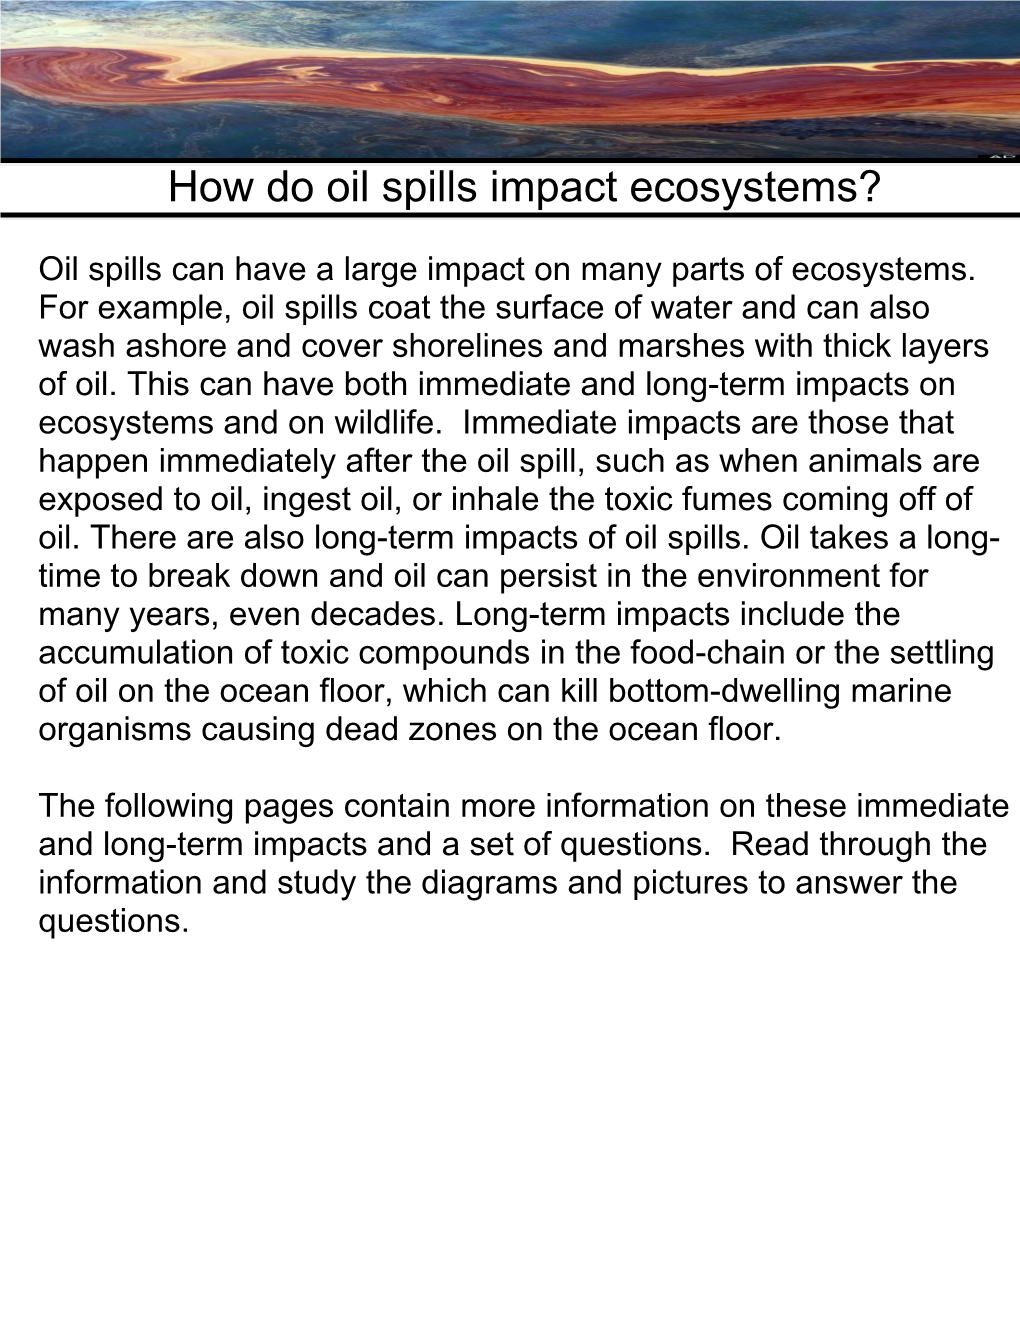 How Do Oil Spills Impact Ecosystems?